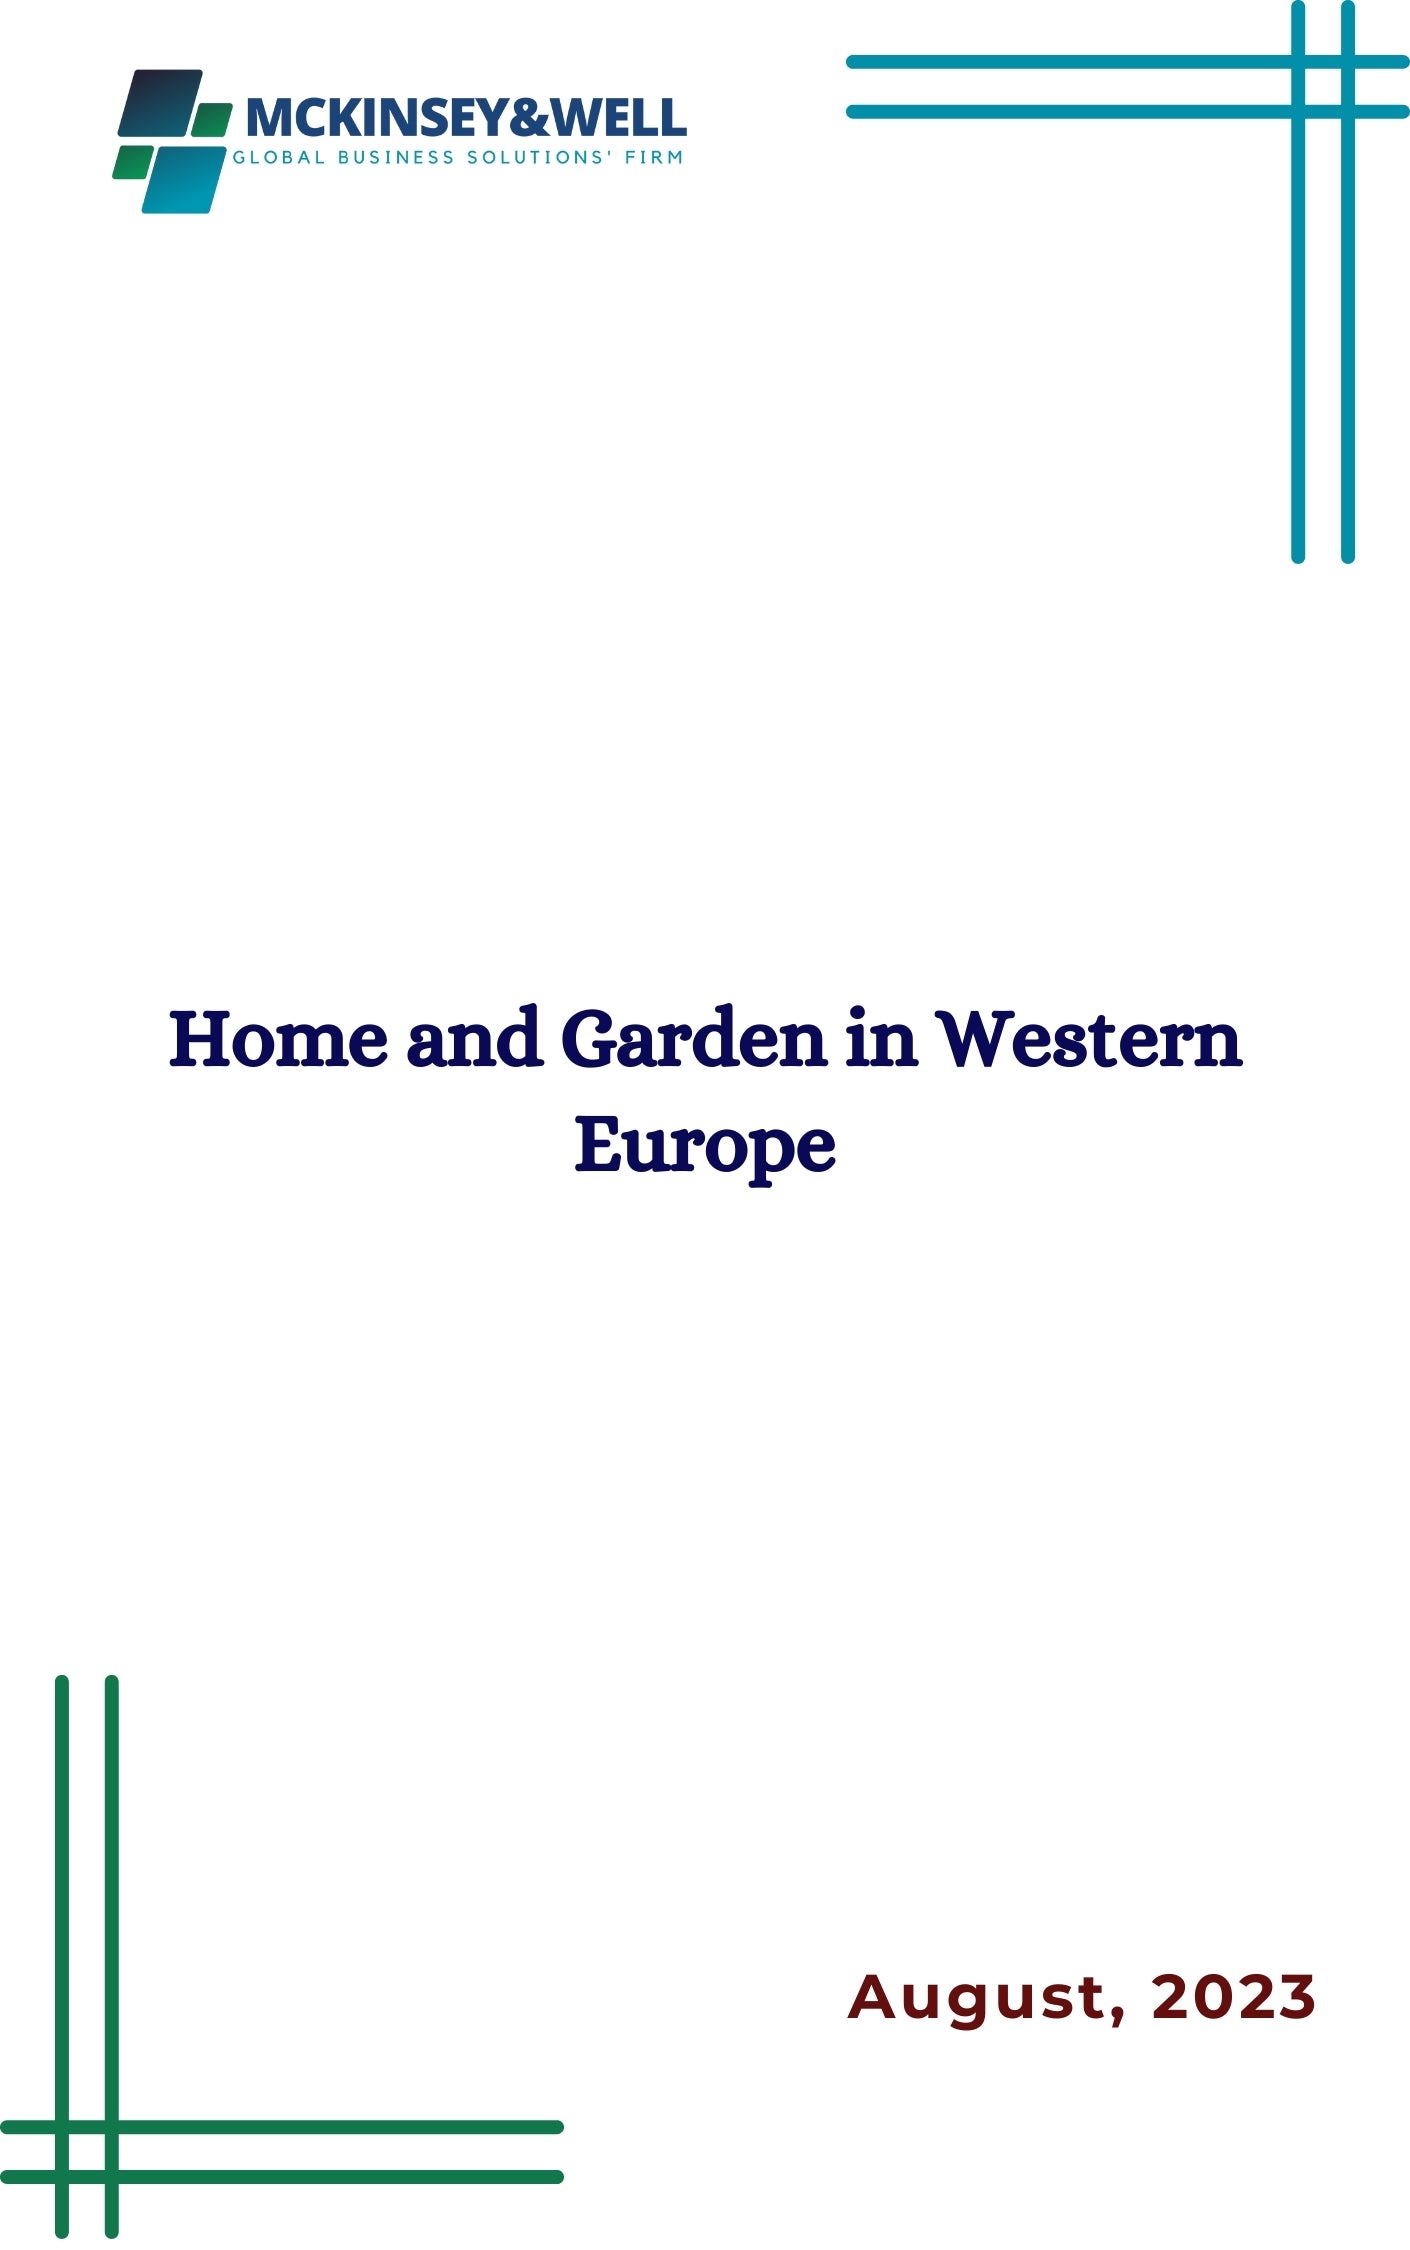 Home and Garden in Western Europe